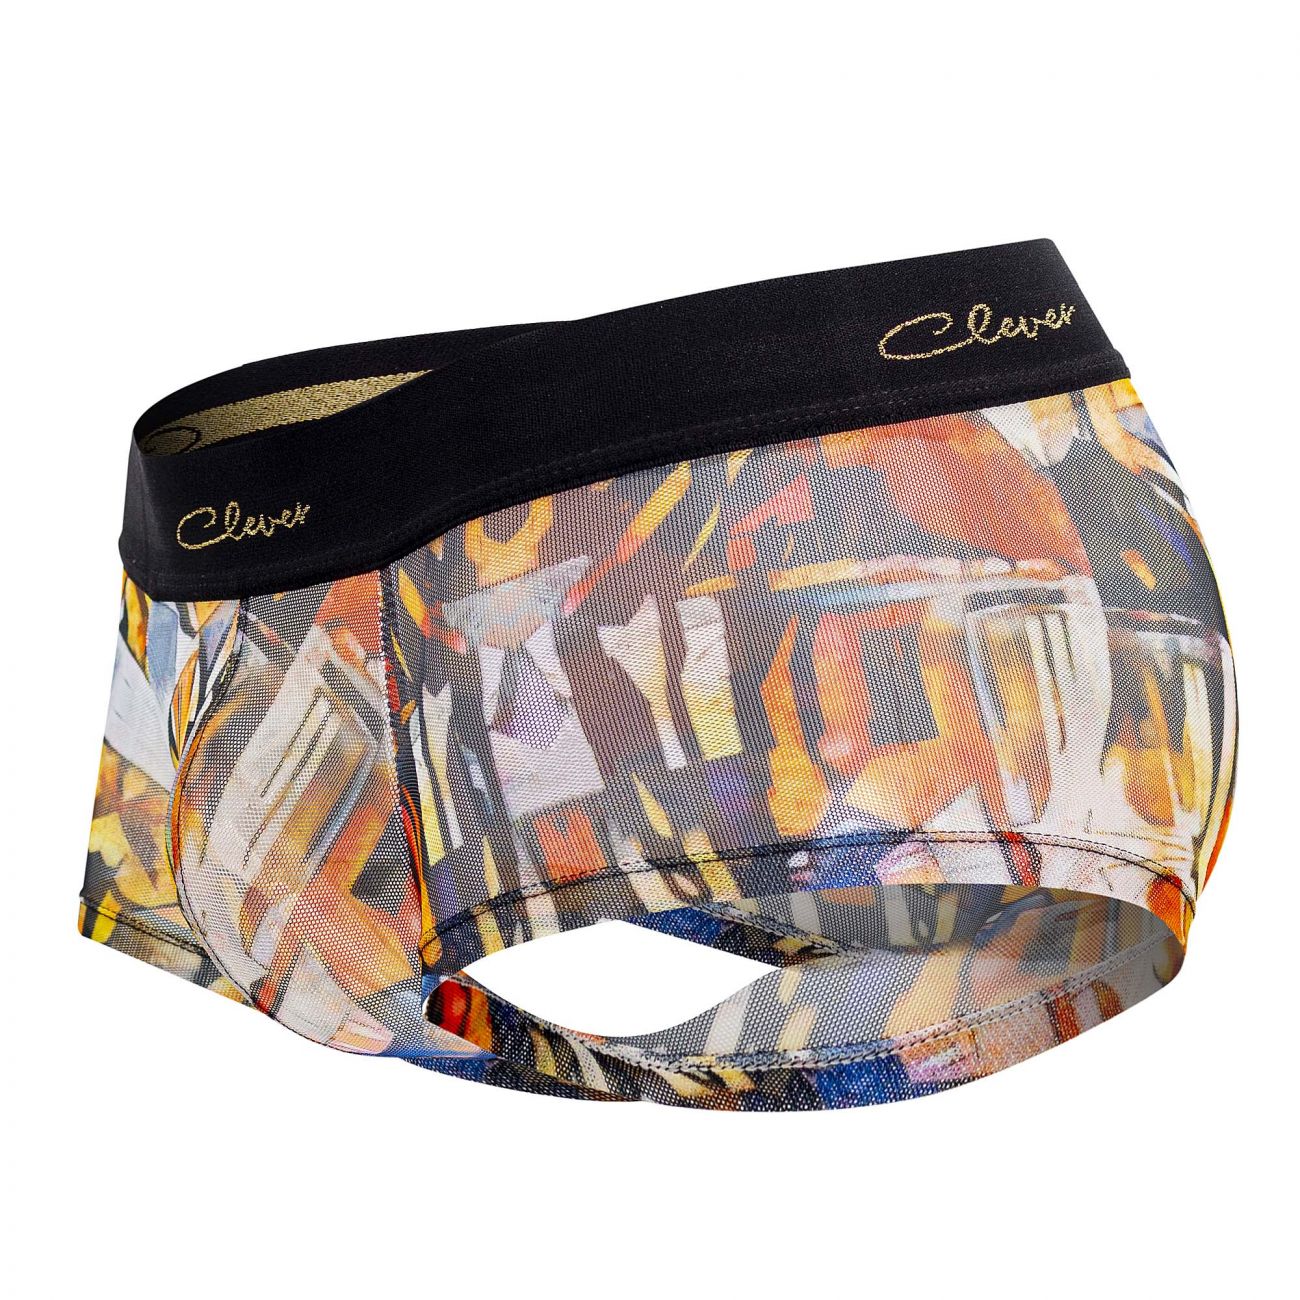 Clever 0668-1 Tonos Trunks Color Yellow